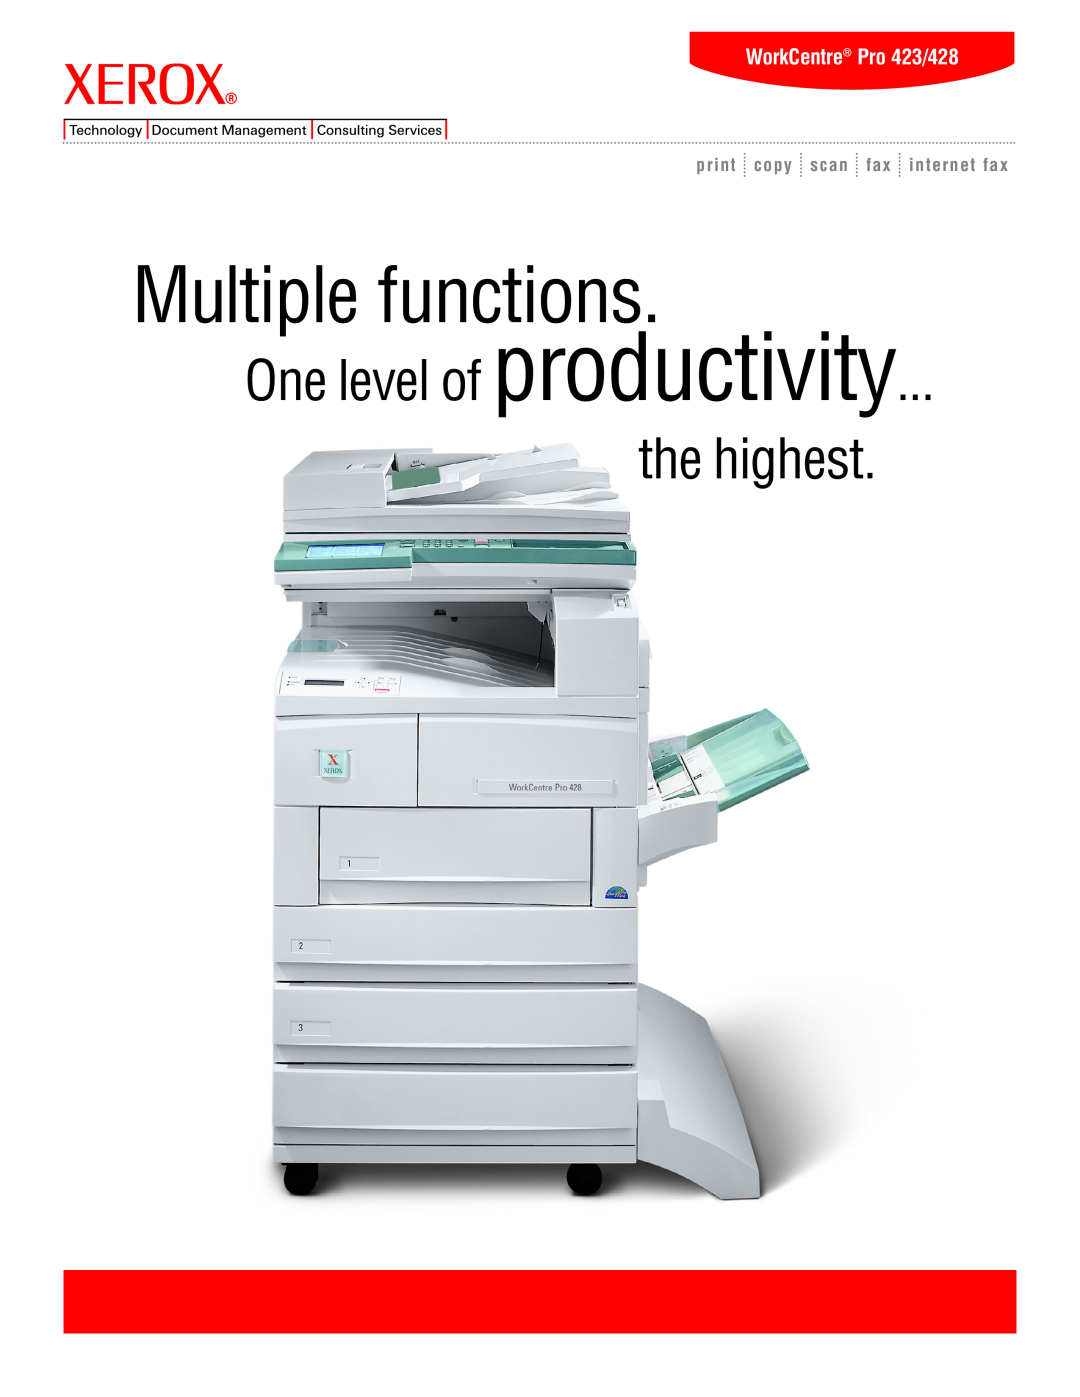 Xerox manual WorkCentre Pro 423/428, Multiple functions, One level of productivity the highest 